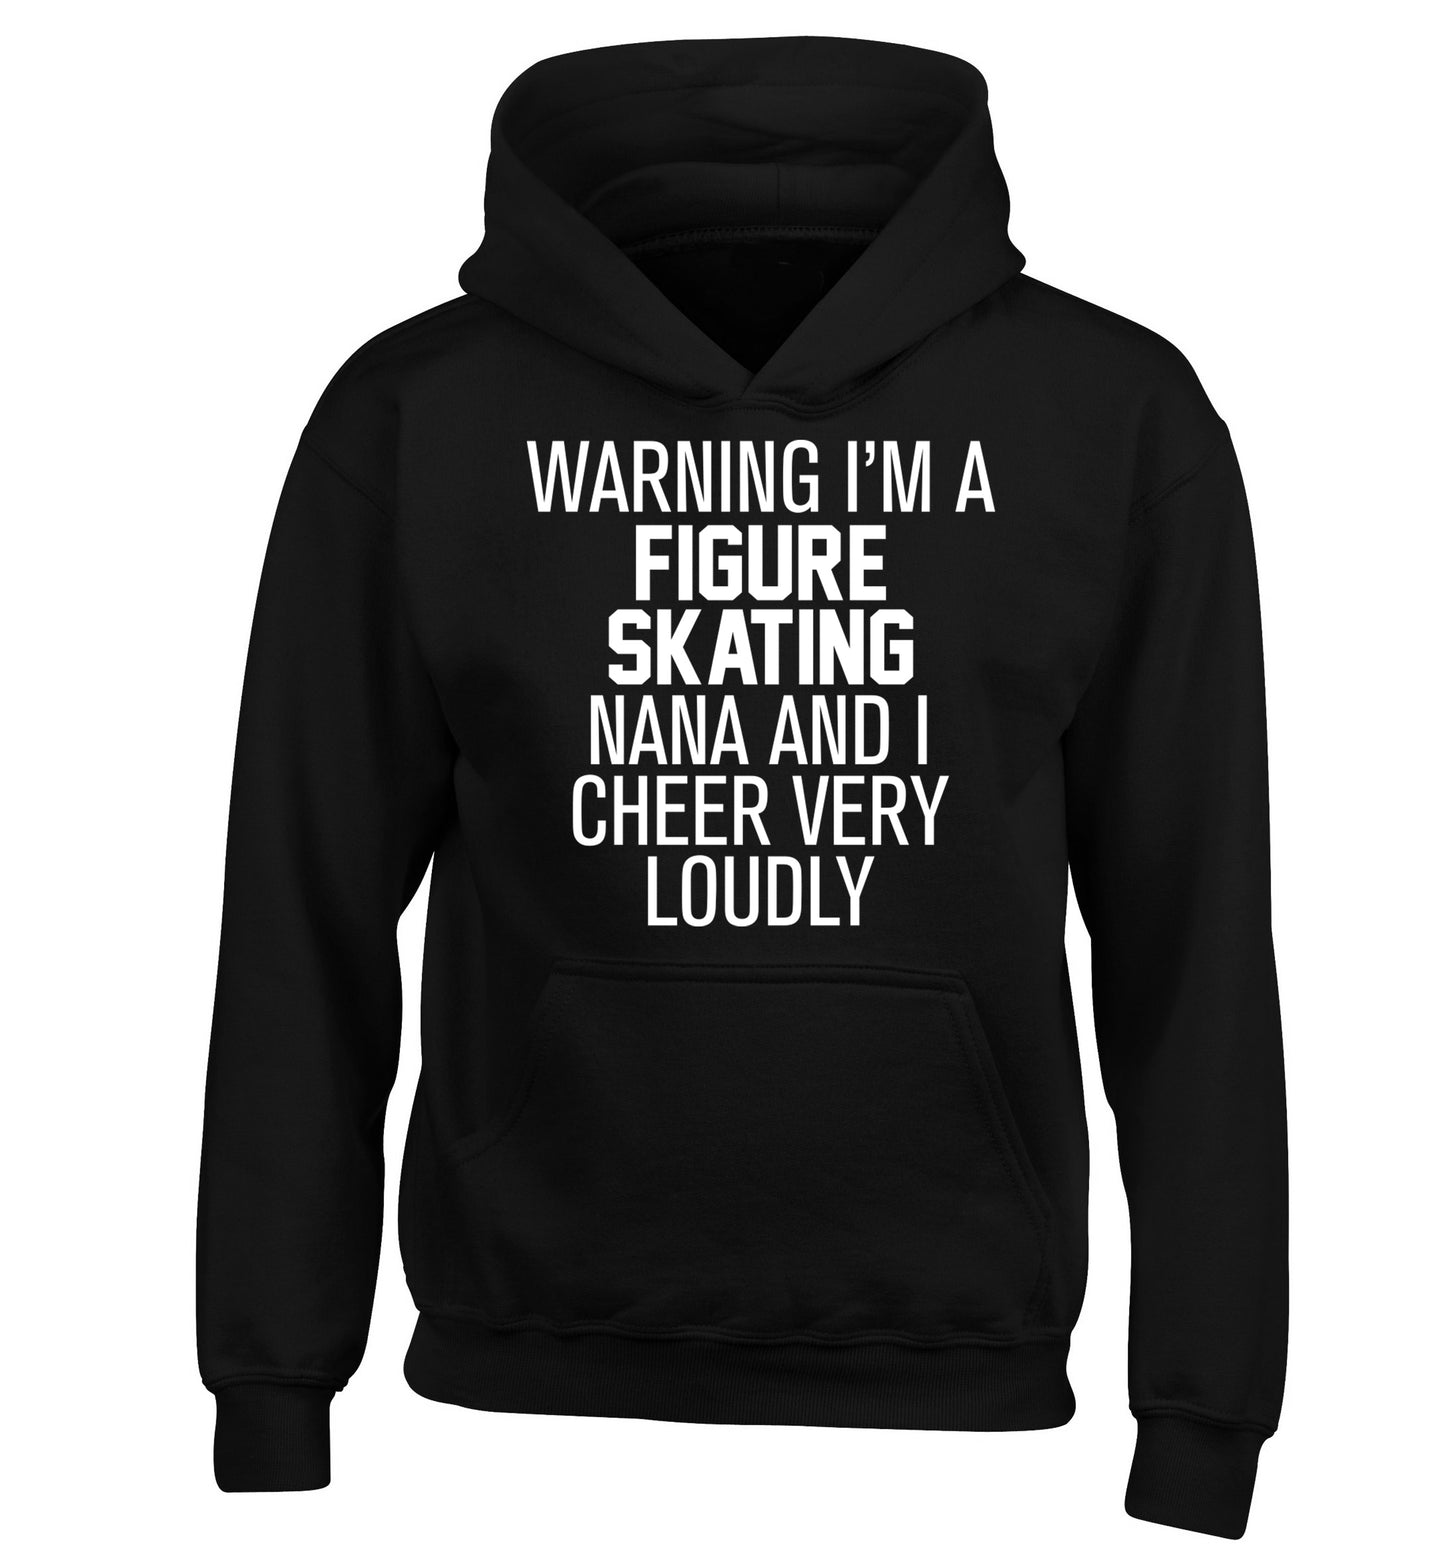 Warning I'm a figure skating nana and I cheer very loudly children's black hoodie 12-14 Years